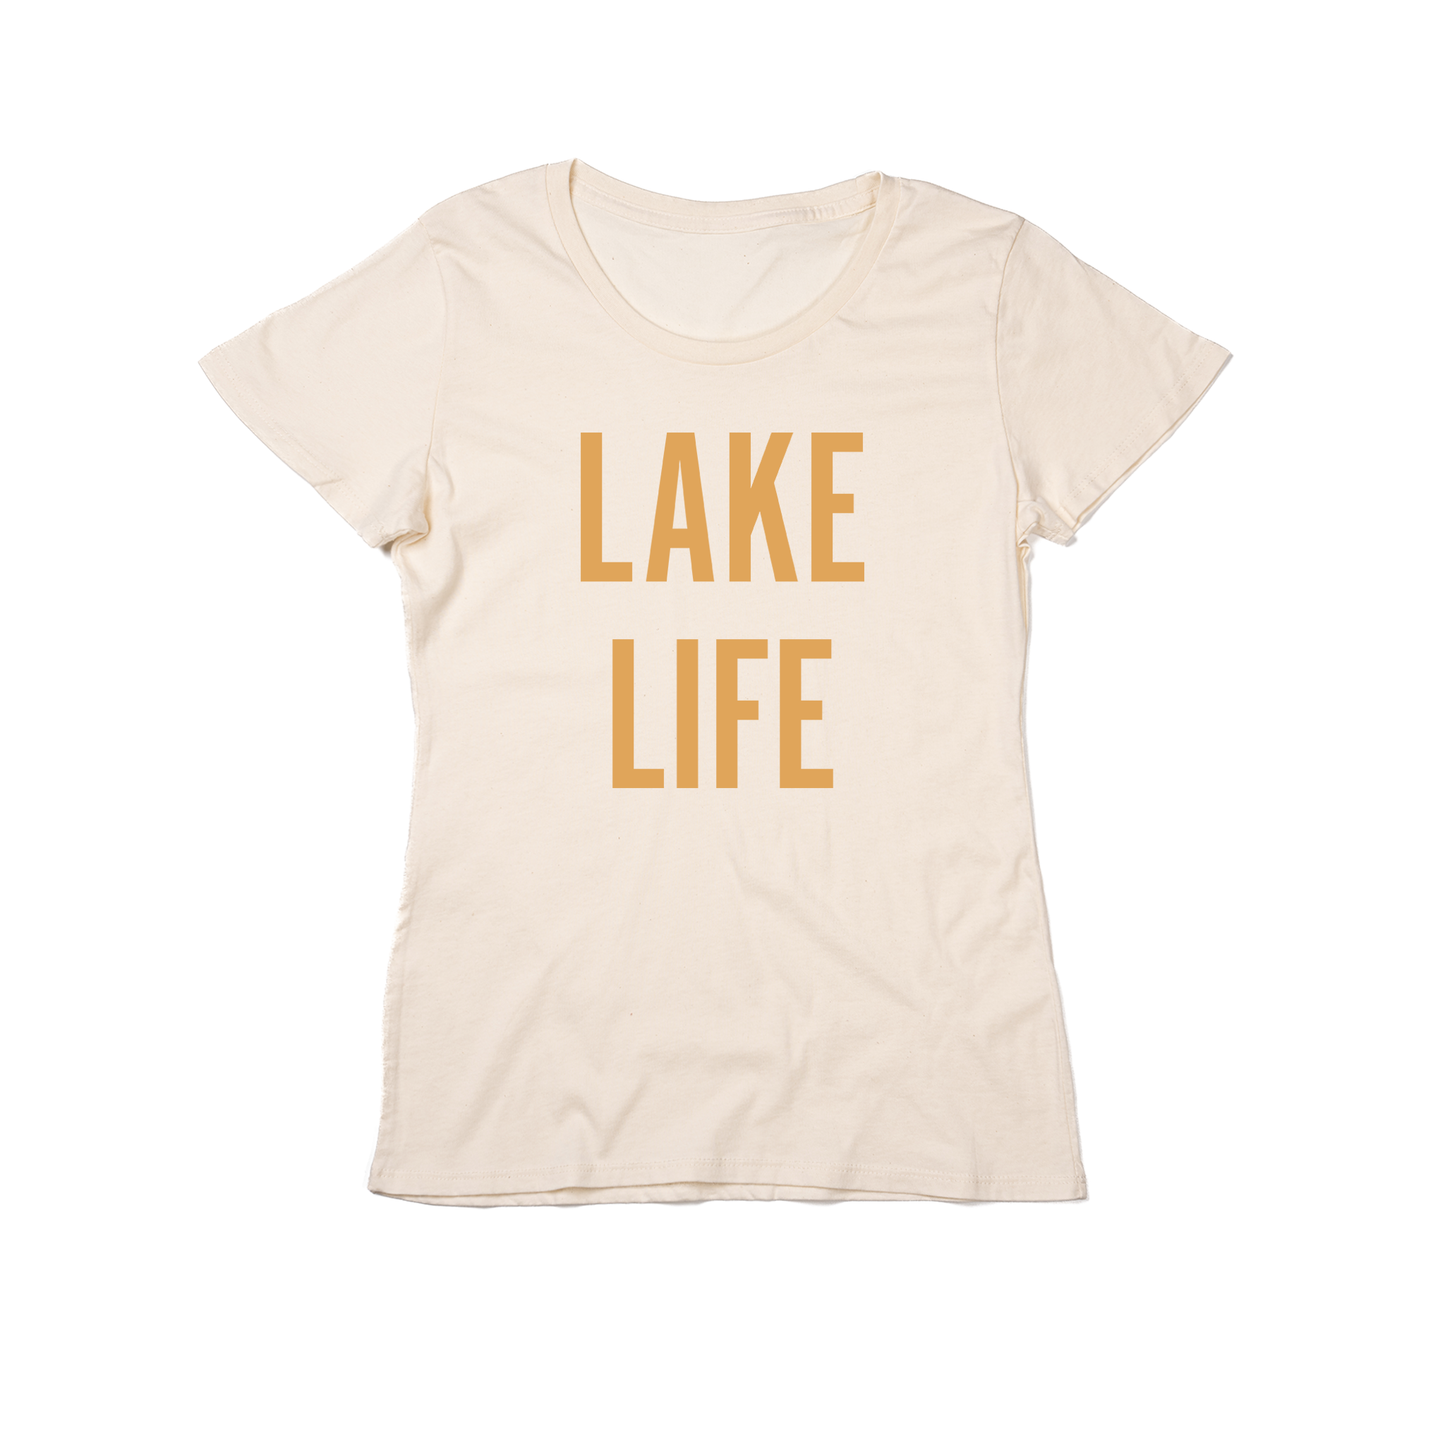 Lake Life (Mustard) - Women's Fitted Tee (Natural)